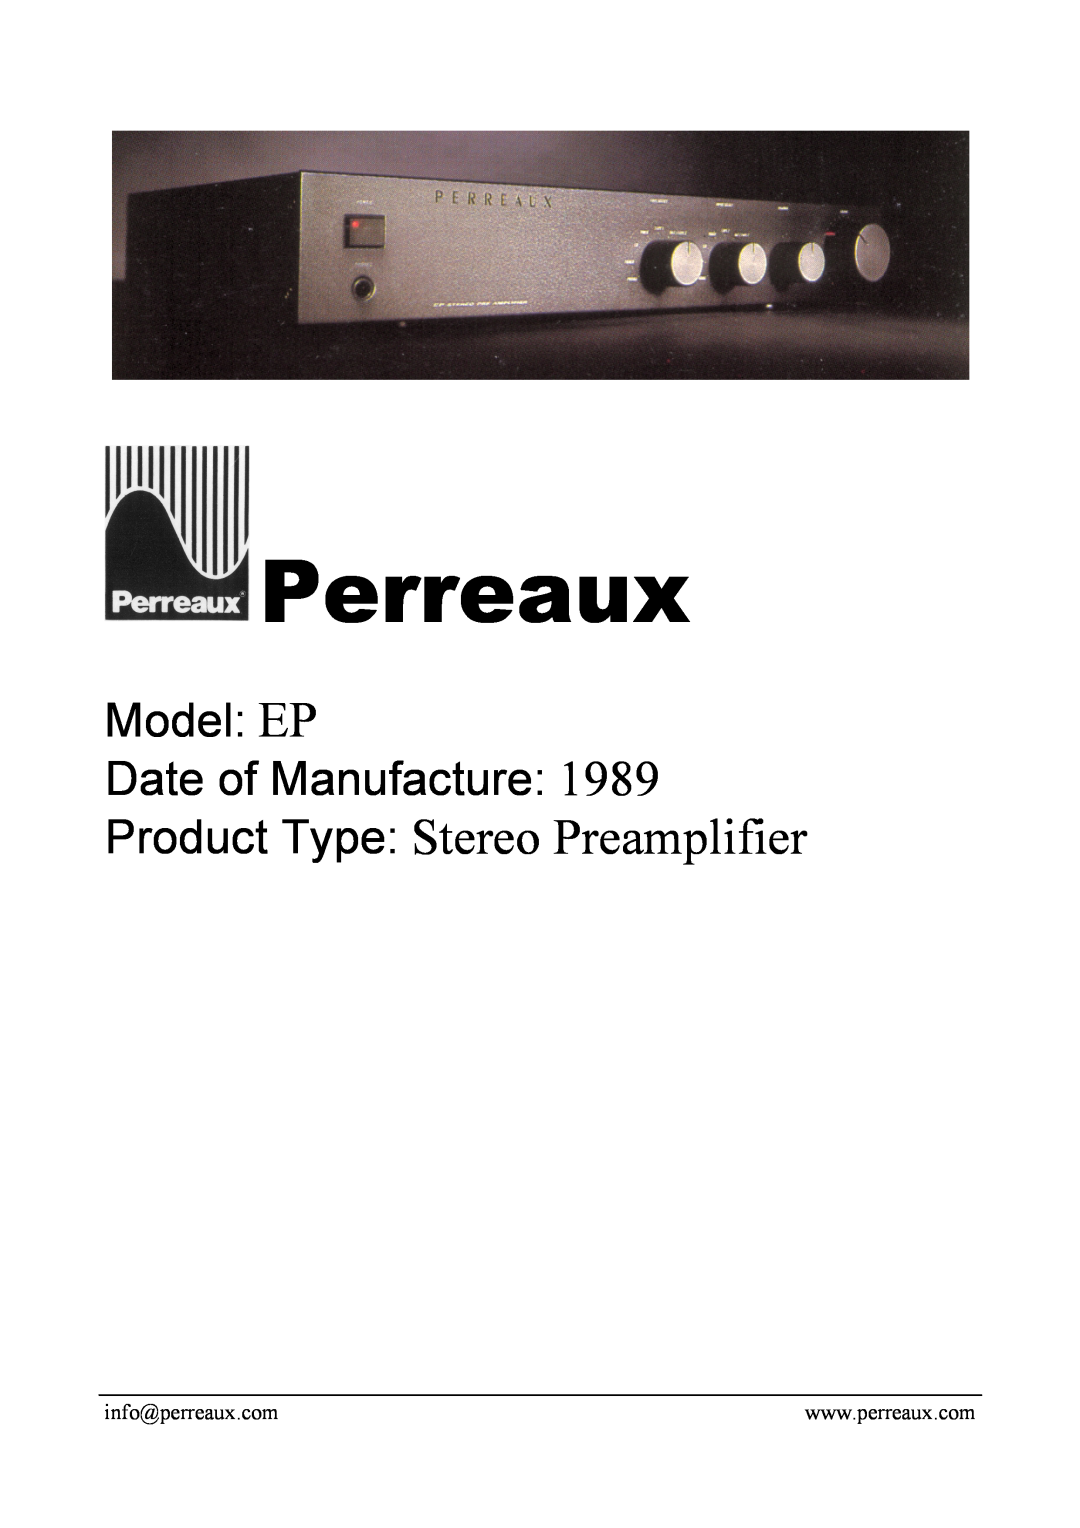 Perreaux manual Perreaux, Product Type Stereo Preamplifier, Model EP Date of Manufacture 